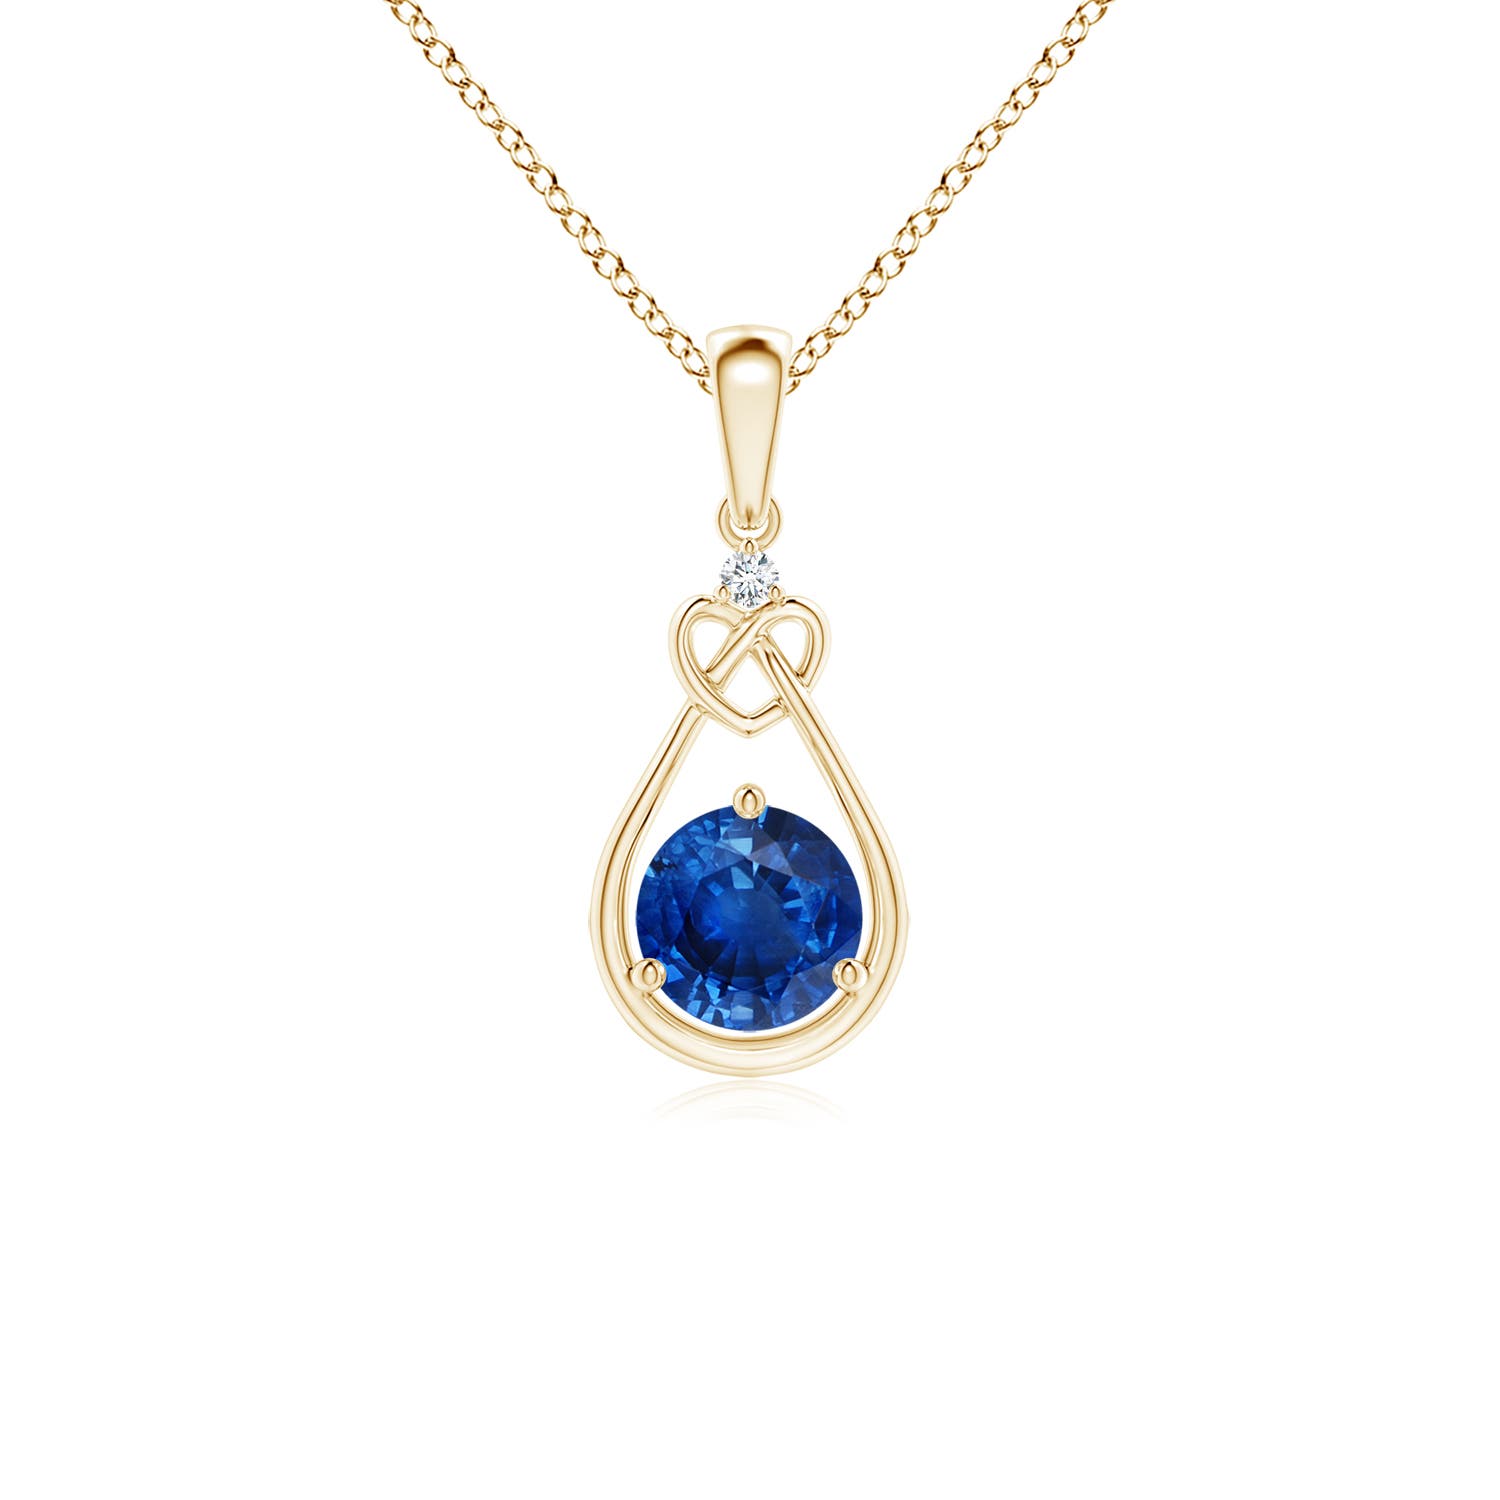 AAA - Blue Sapphire / 0.61 CT / 14 KT Yellow Gold